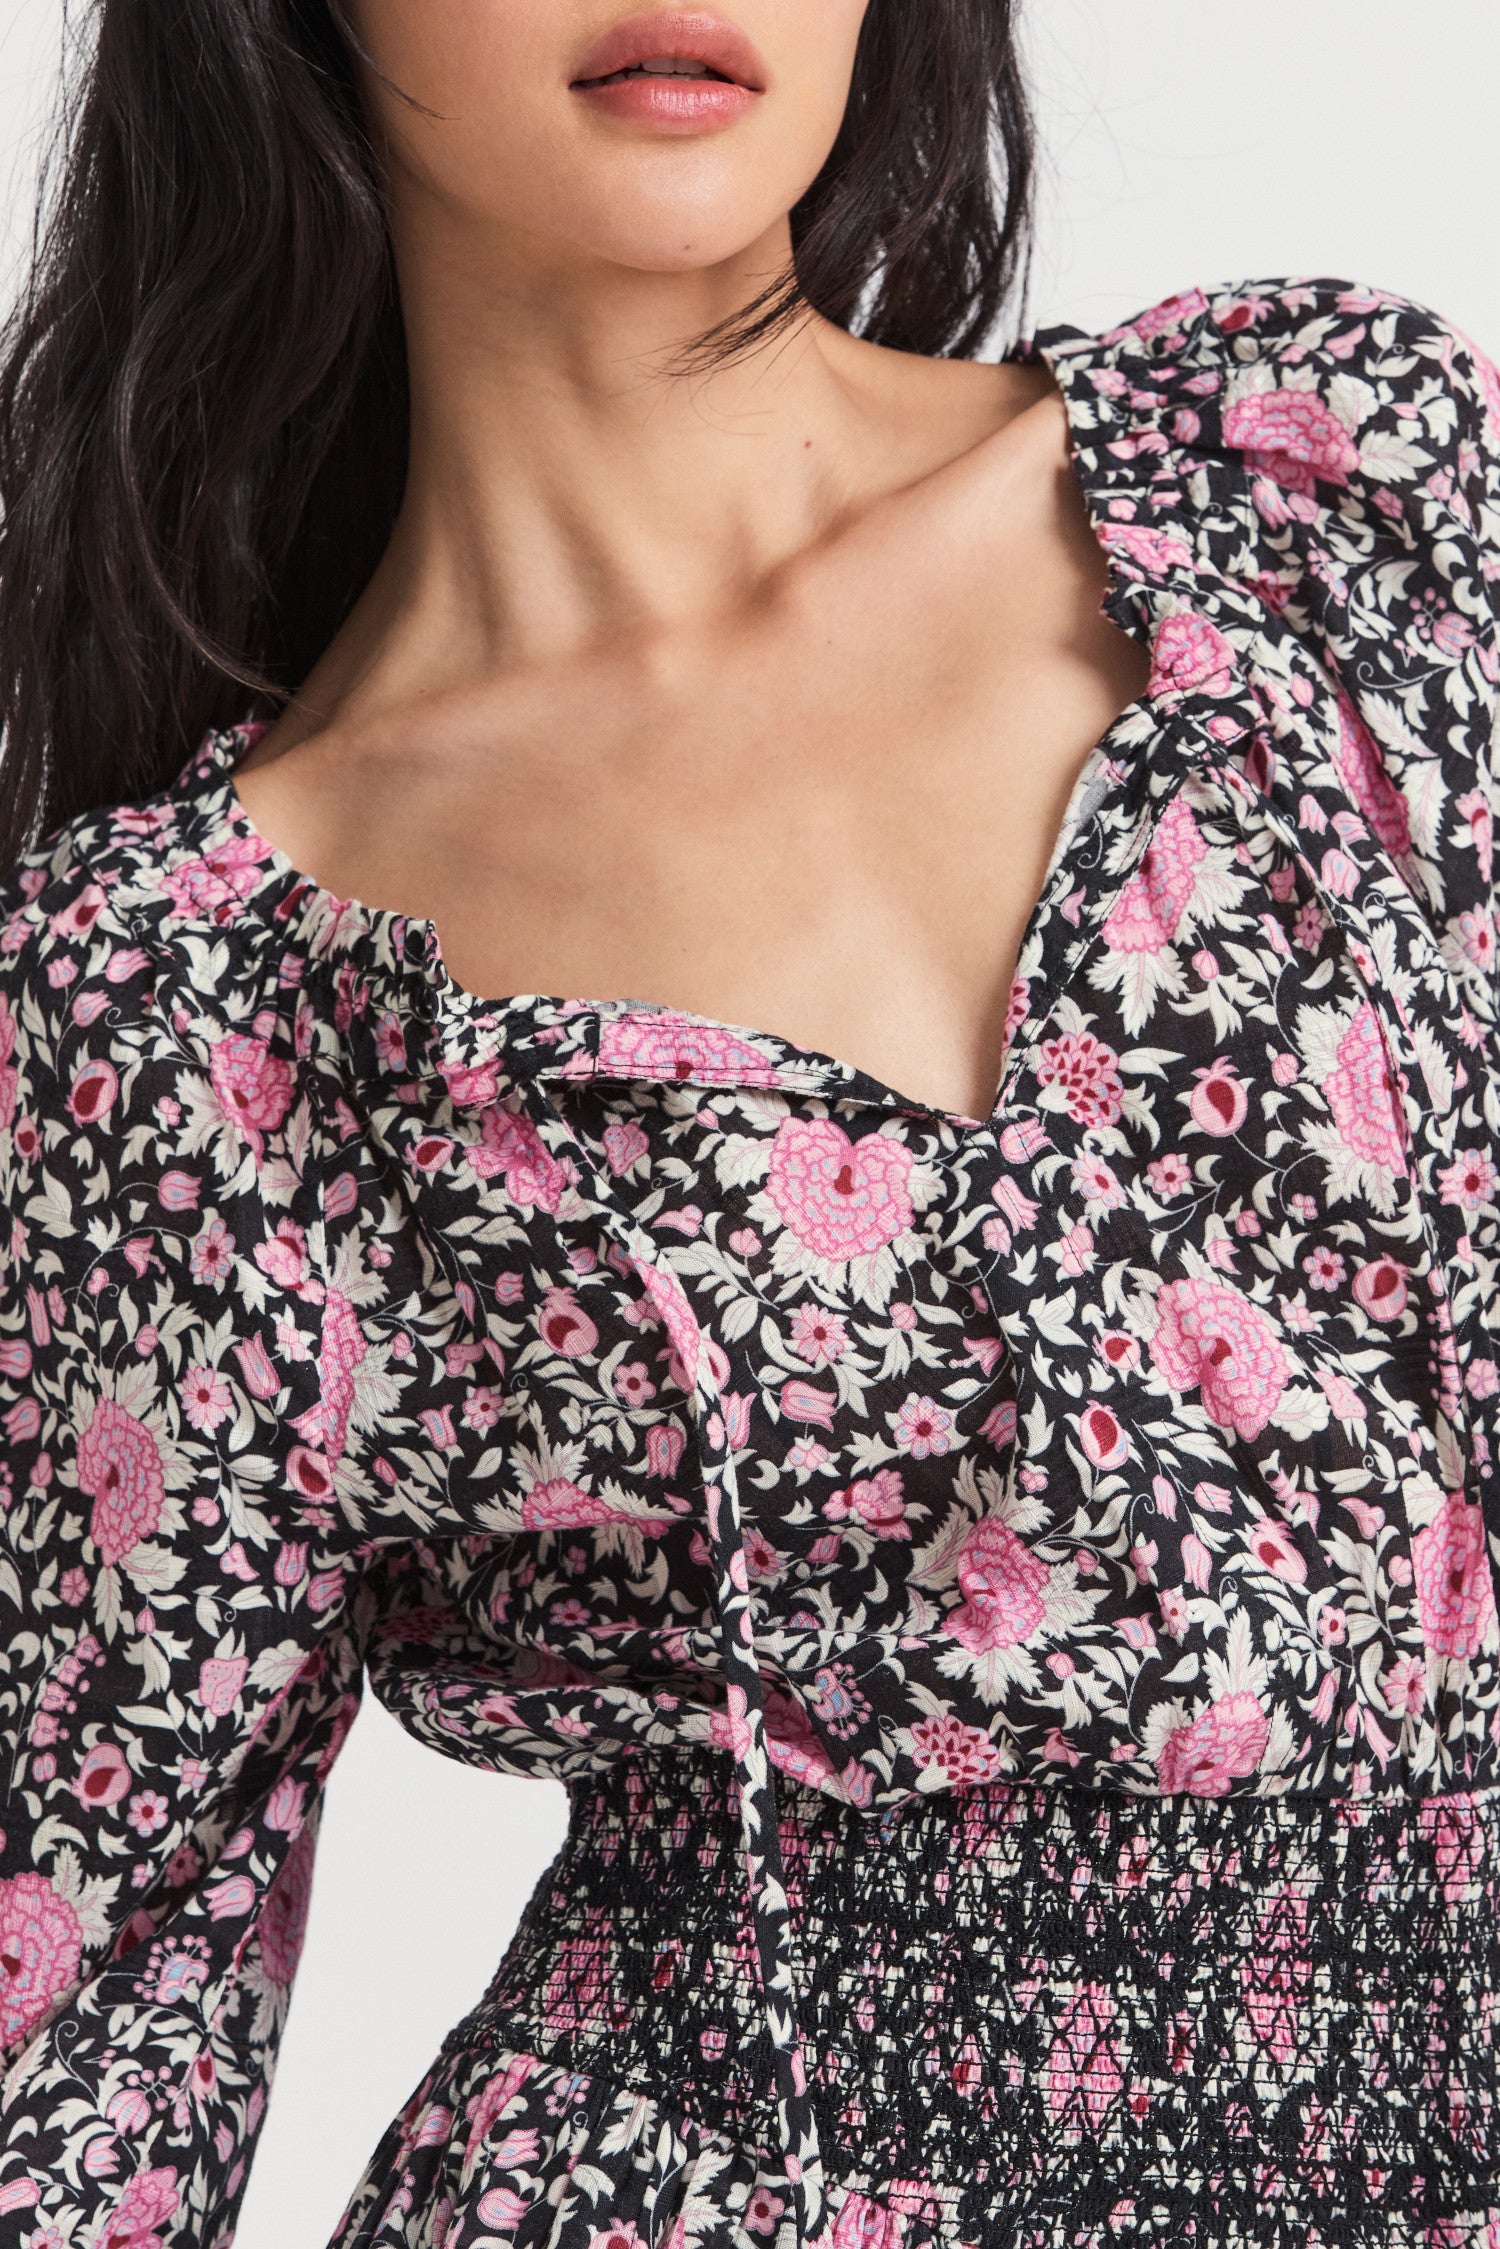 Black mini dress with a pink floral print. Featuring an elasticated neck opening with a tie at the front, an easy bodice with a stretchy smocked waist that releases into a tiered skirt that hikes up slightly on each side.